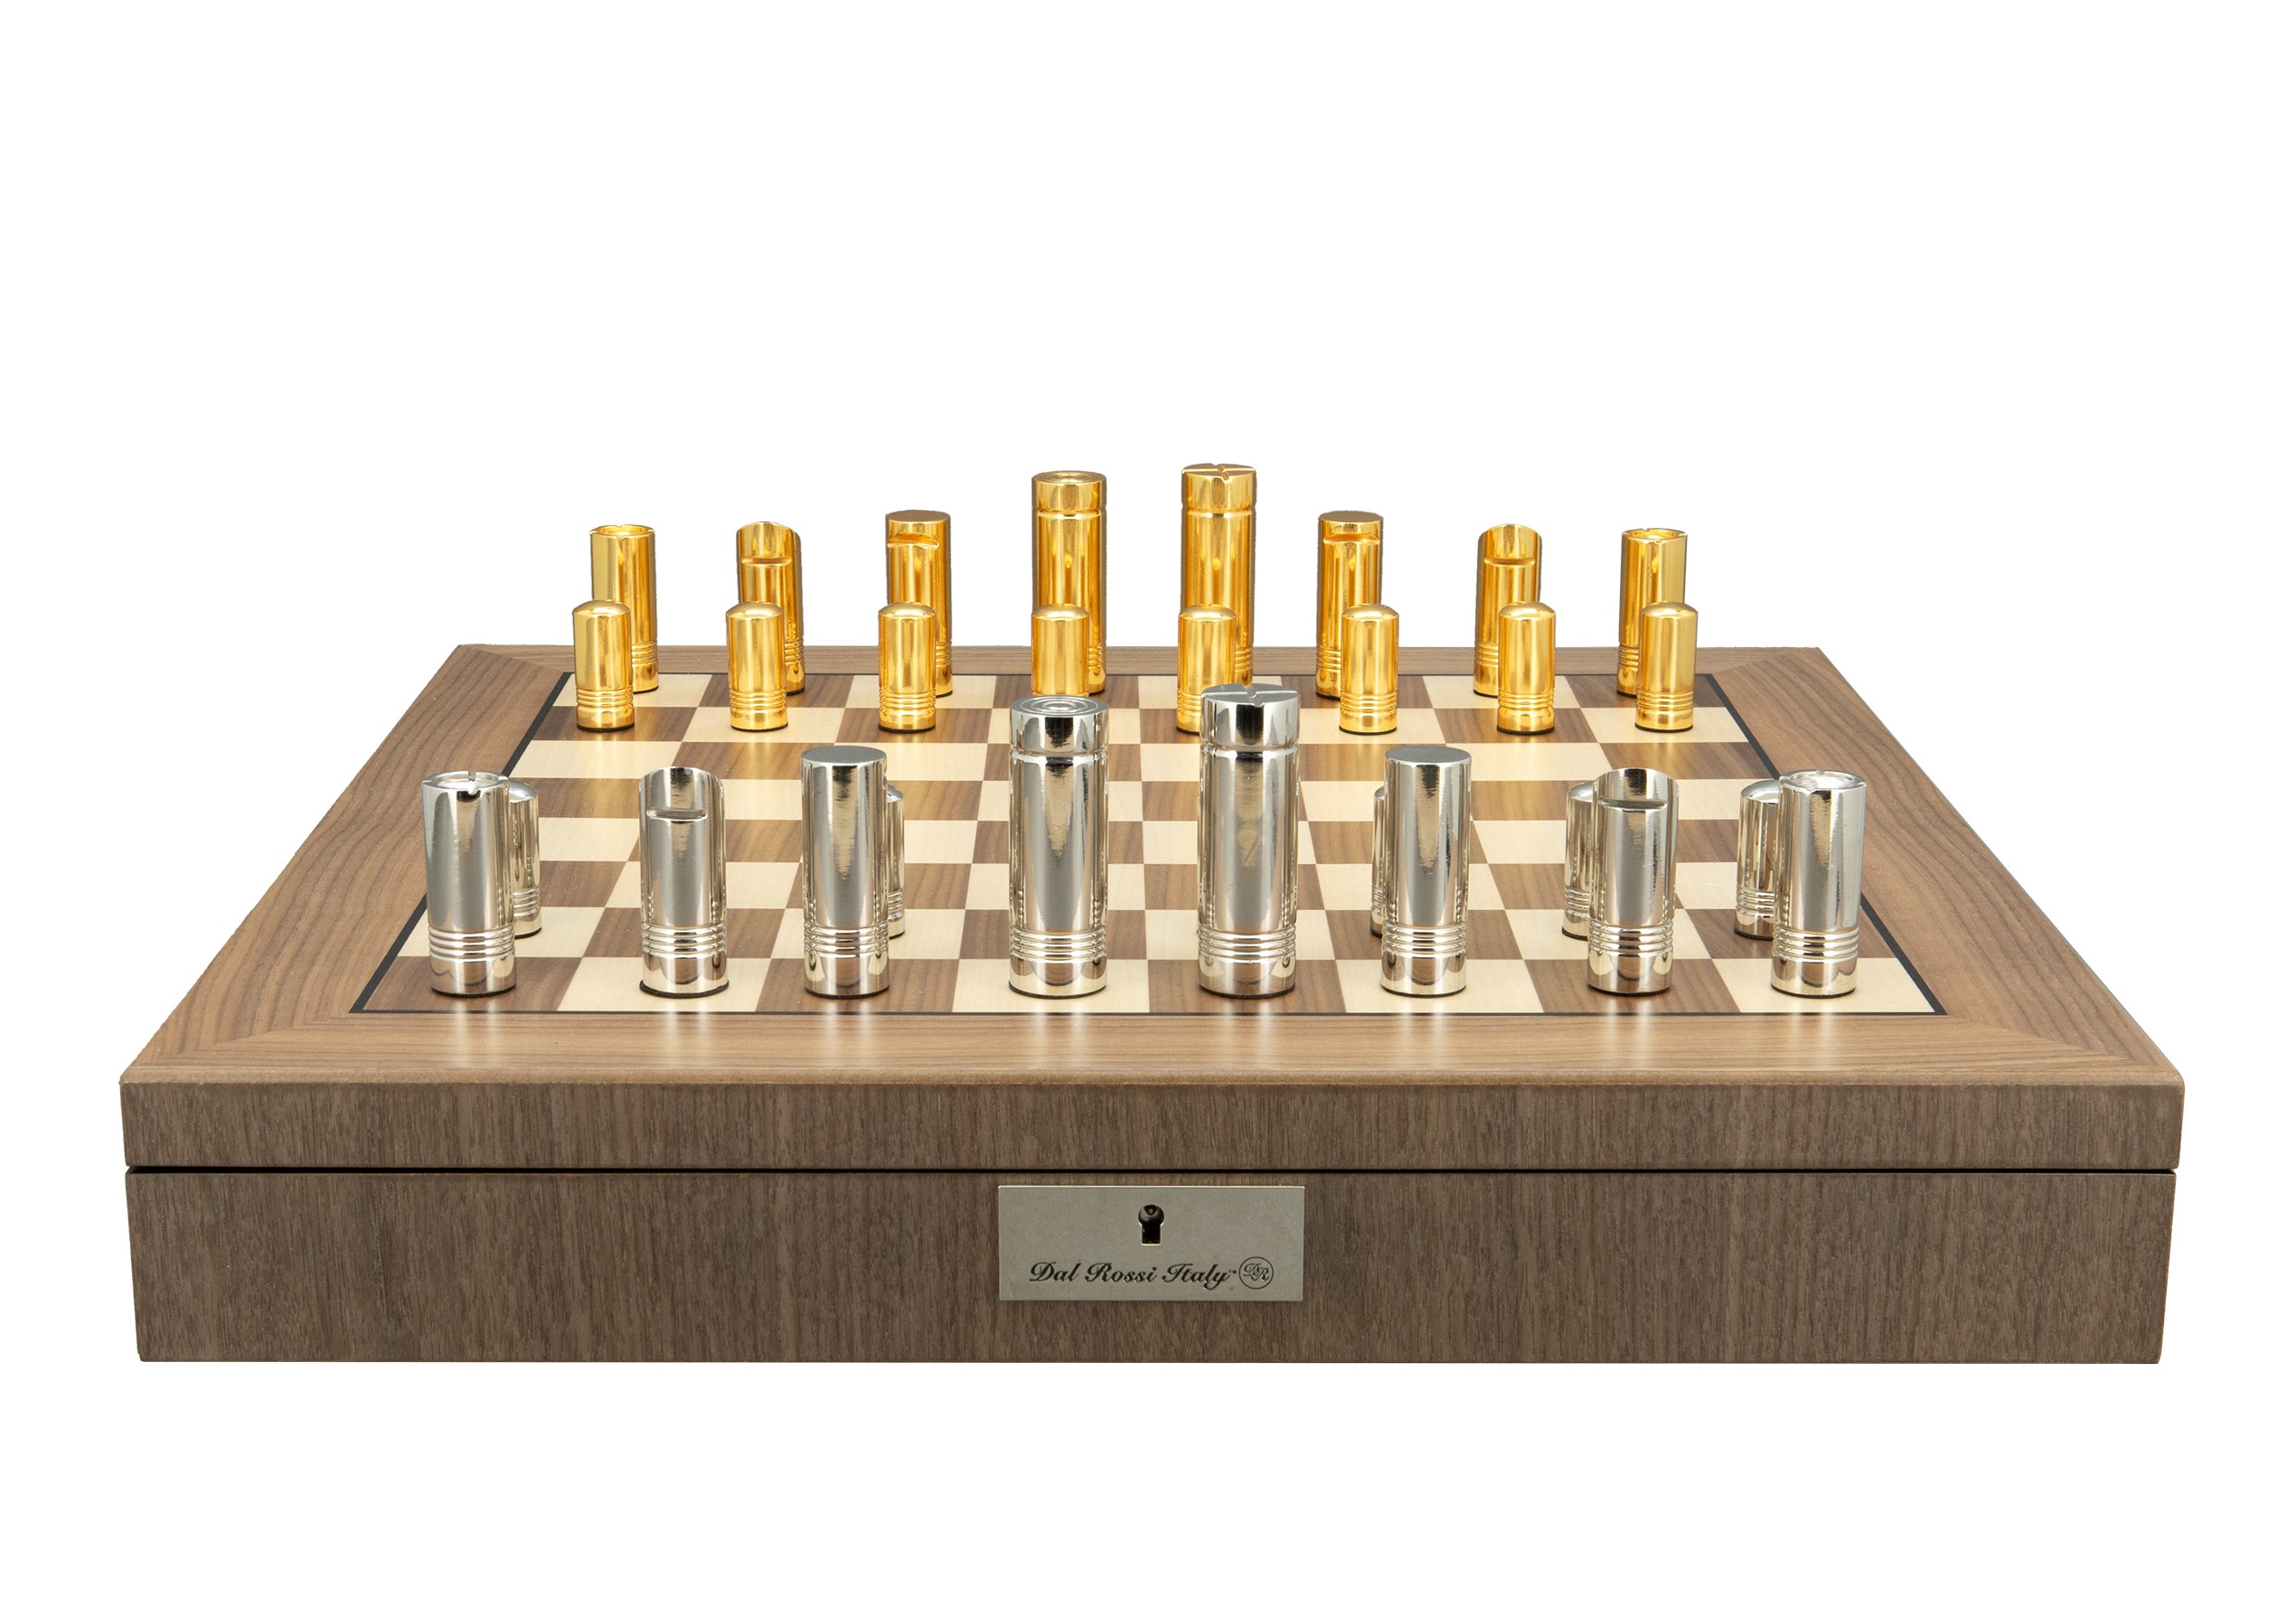 Dal Rossi Italy, Modern Gold and Silver Chessmen 75mm Chessmen on a Walnut Inlaid Chess Box with Compartments 20"